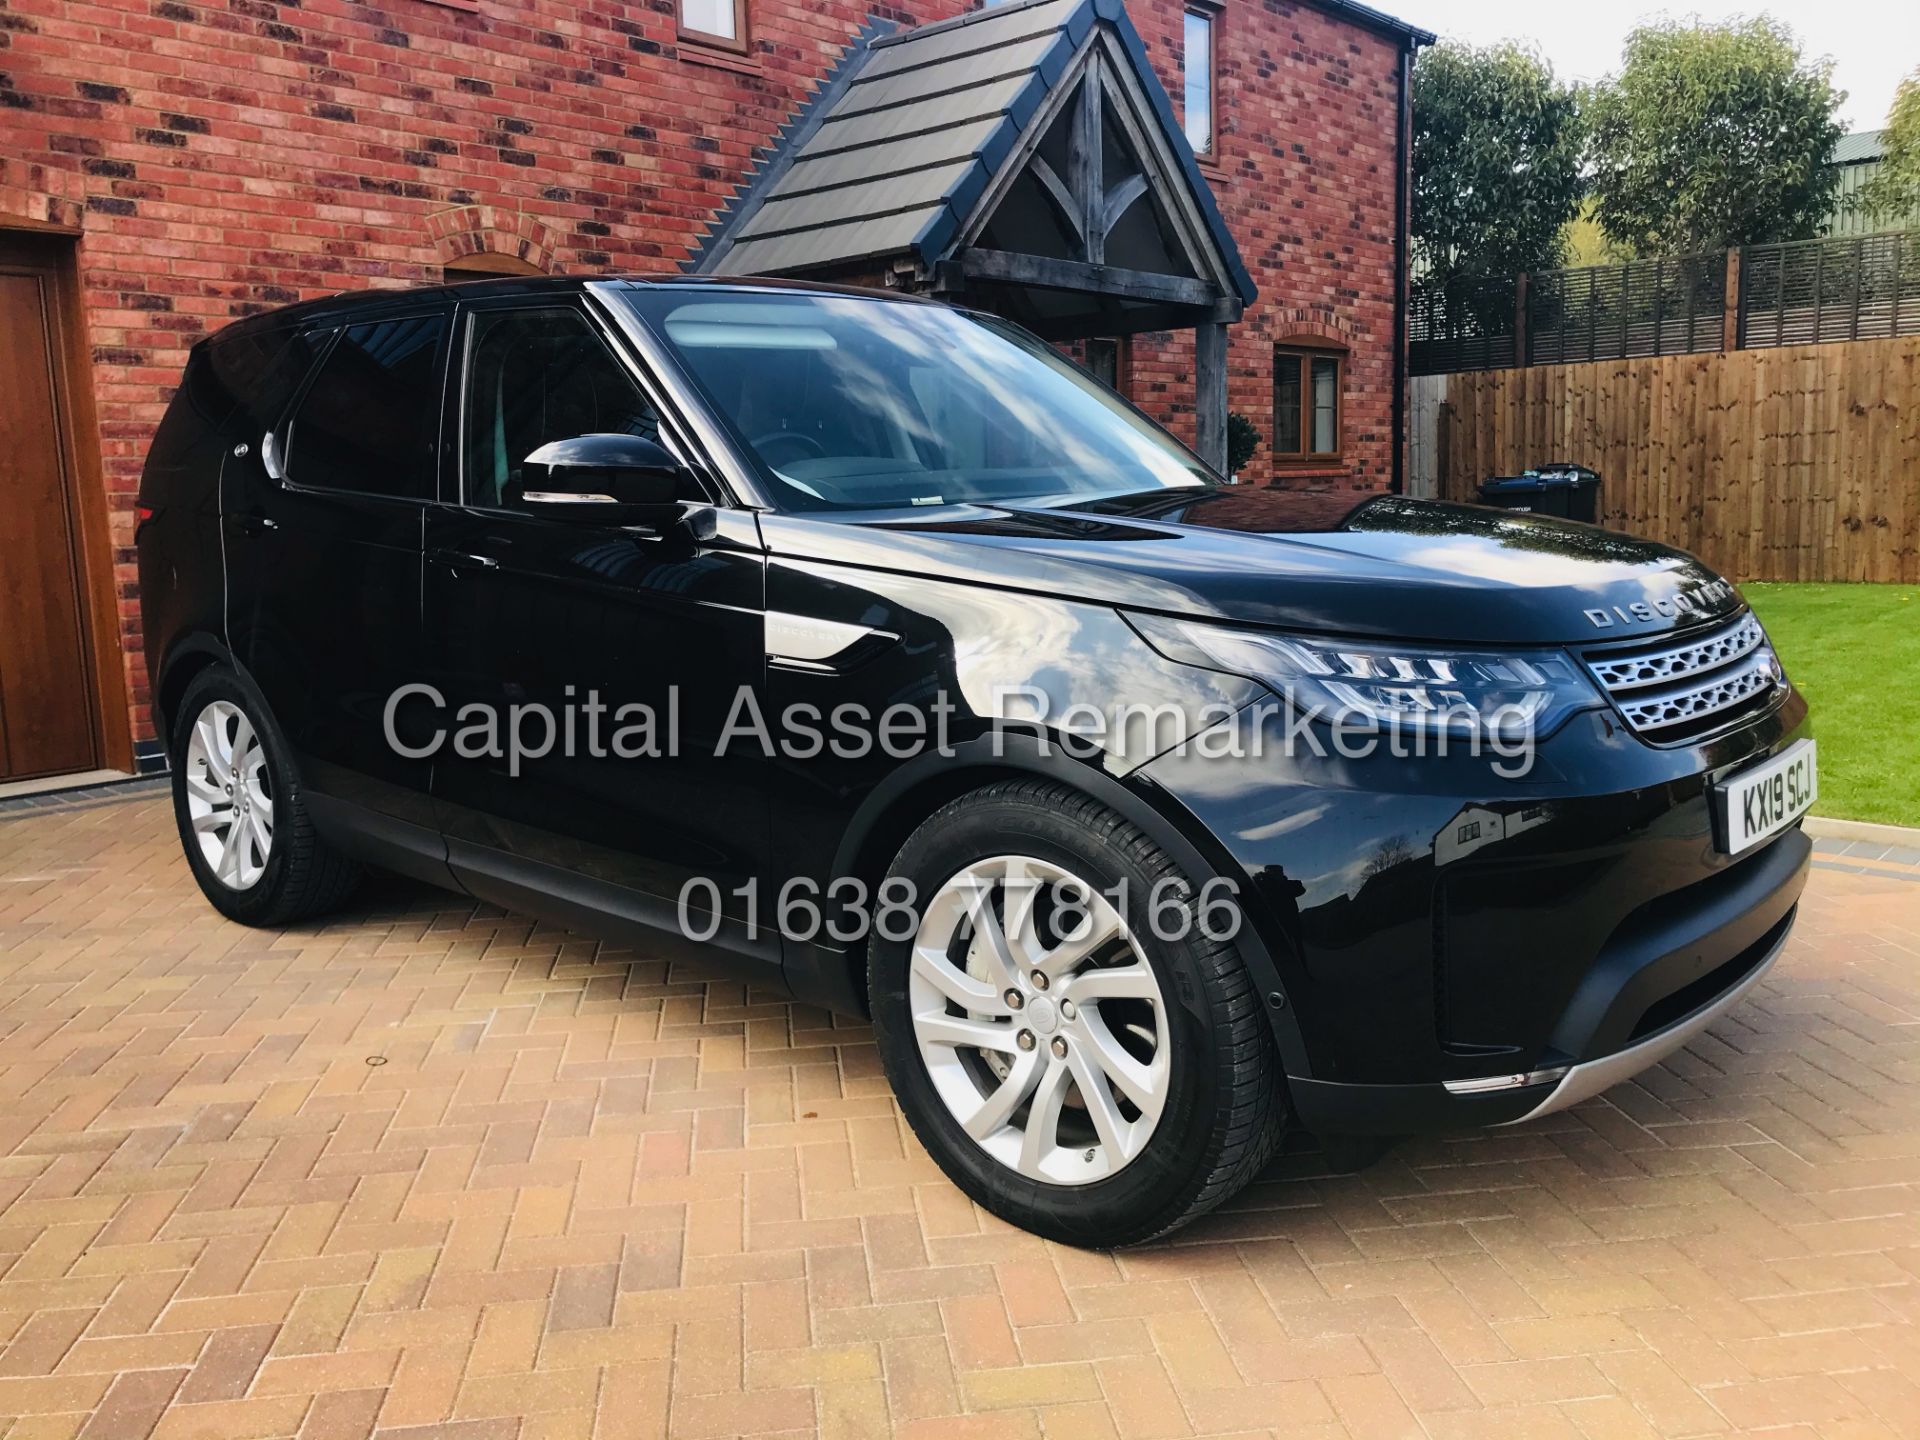 ON SALE LAND ROVER DISCOVERY 3.0 SDV6 "HSE EDITION"7 SEATER(19 REG) 1 OWNER-HUGE SPEC *PAN ROOF* 15K - Image 3 of 27